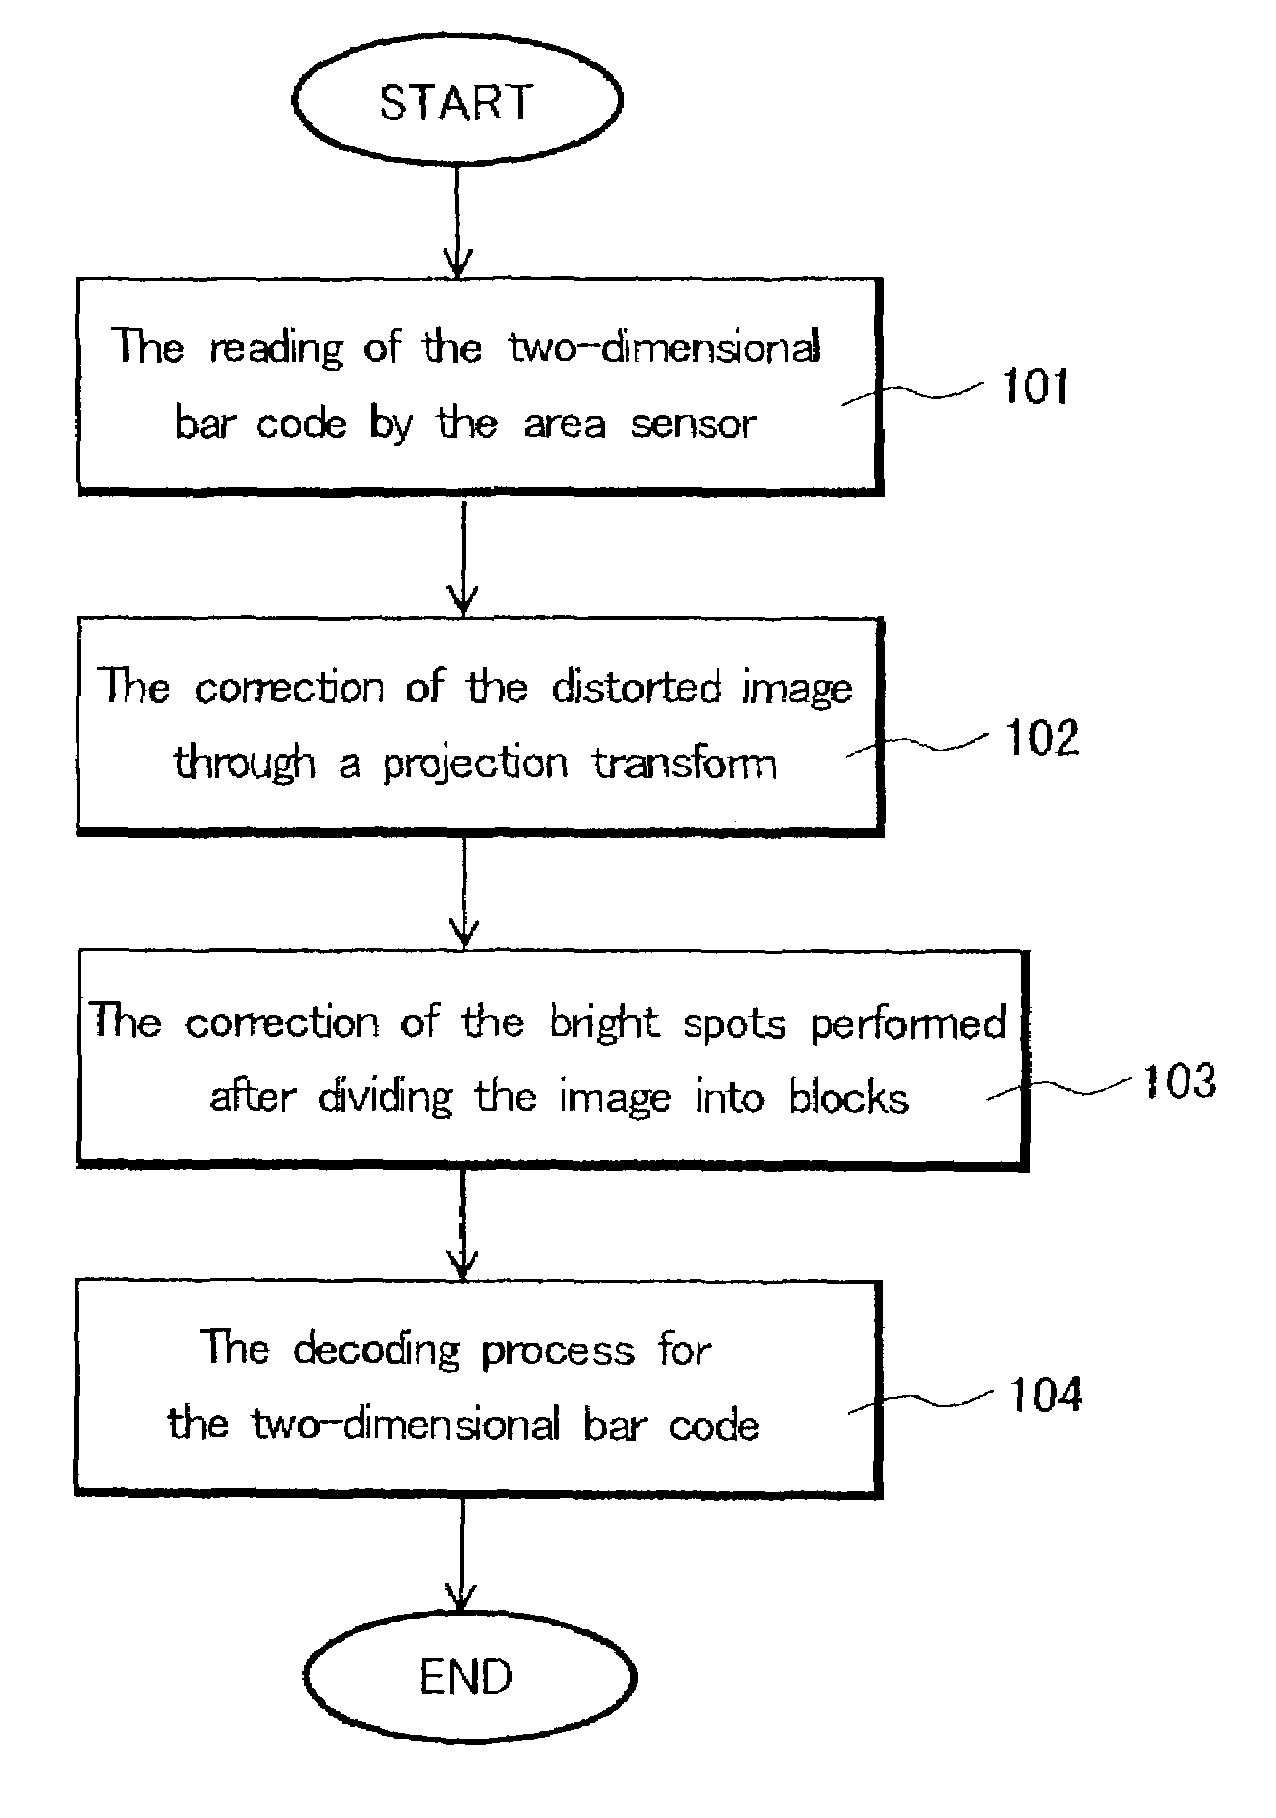 Reading method of the two-dimensional bar code